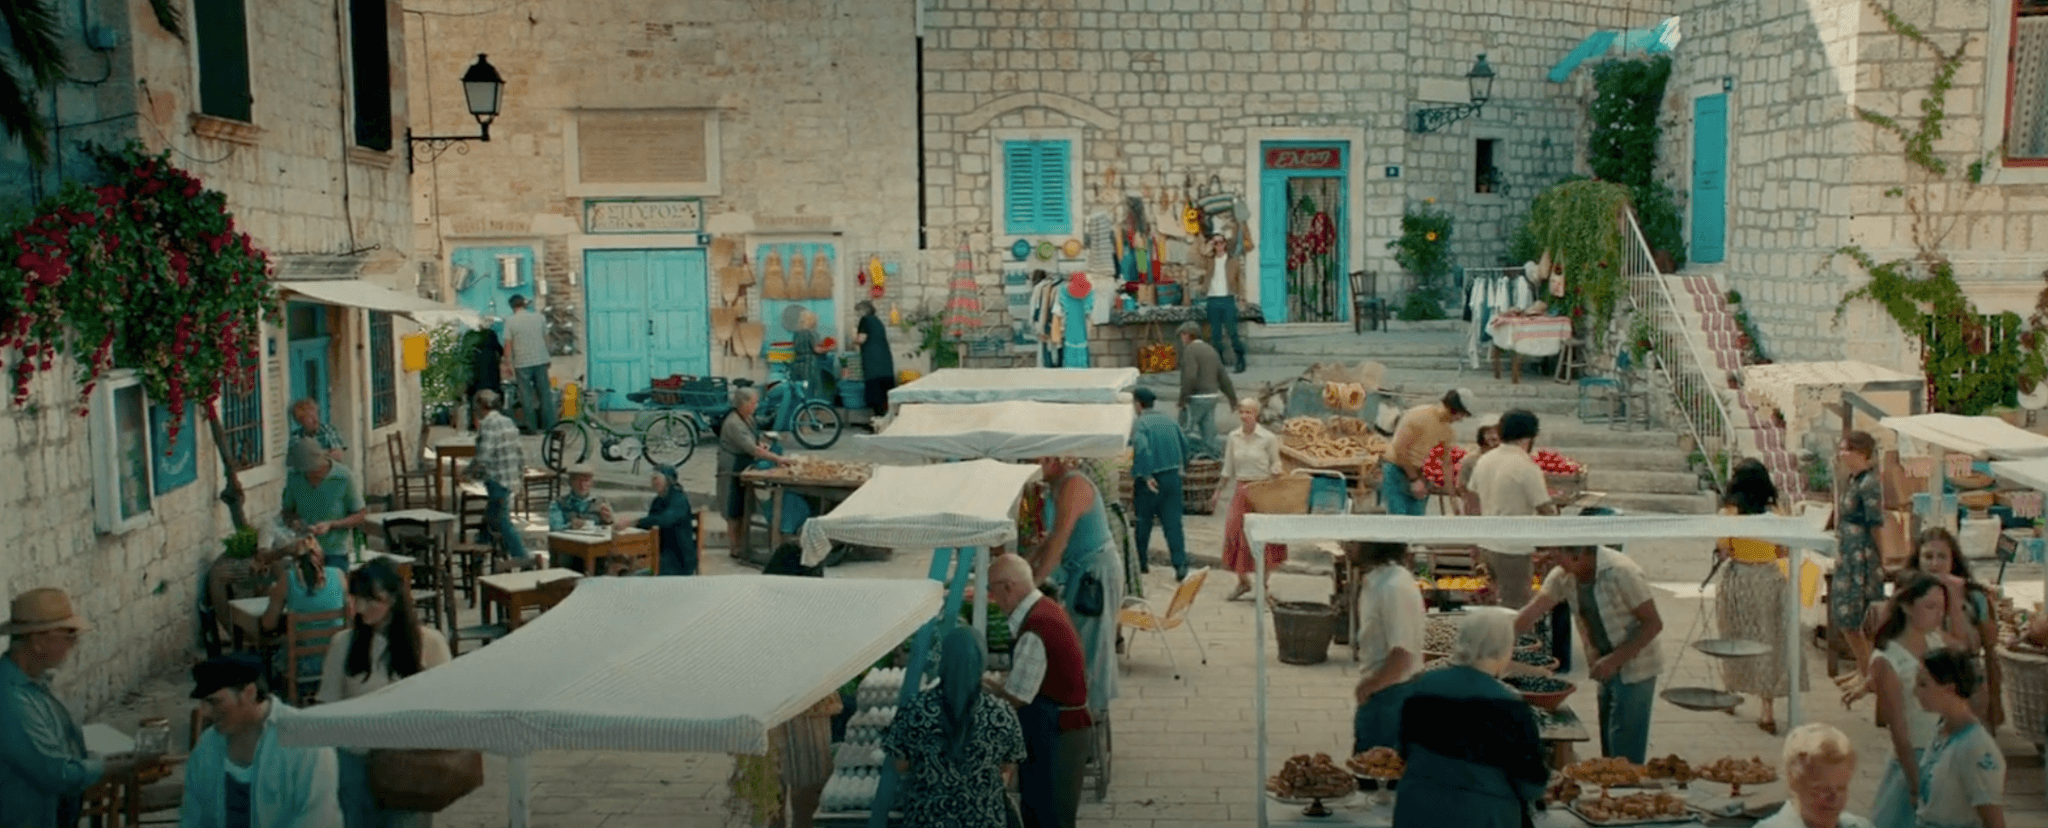 Image belongs to Universal Pictures. Market used in Mamma Mia II